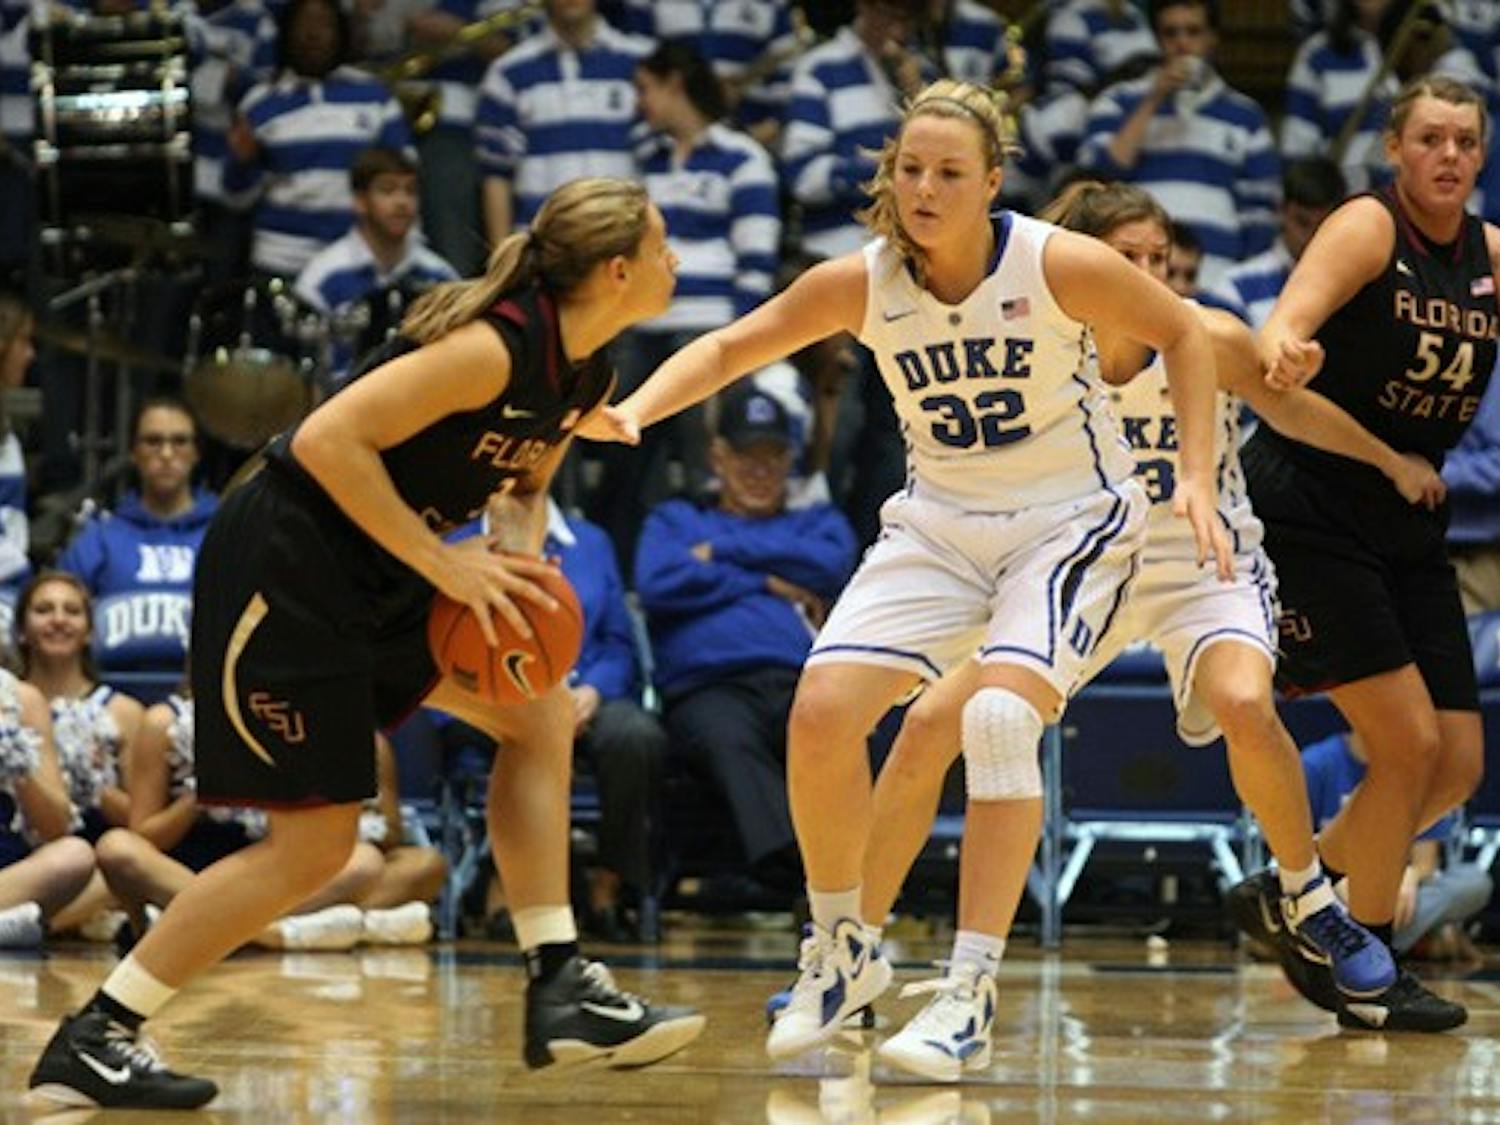 Tricia Liston had her fourth 20-point game of the year in the Blue Devils’ 73-66 win Friday night.